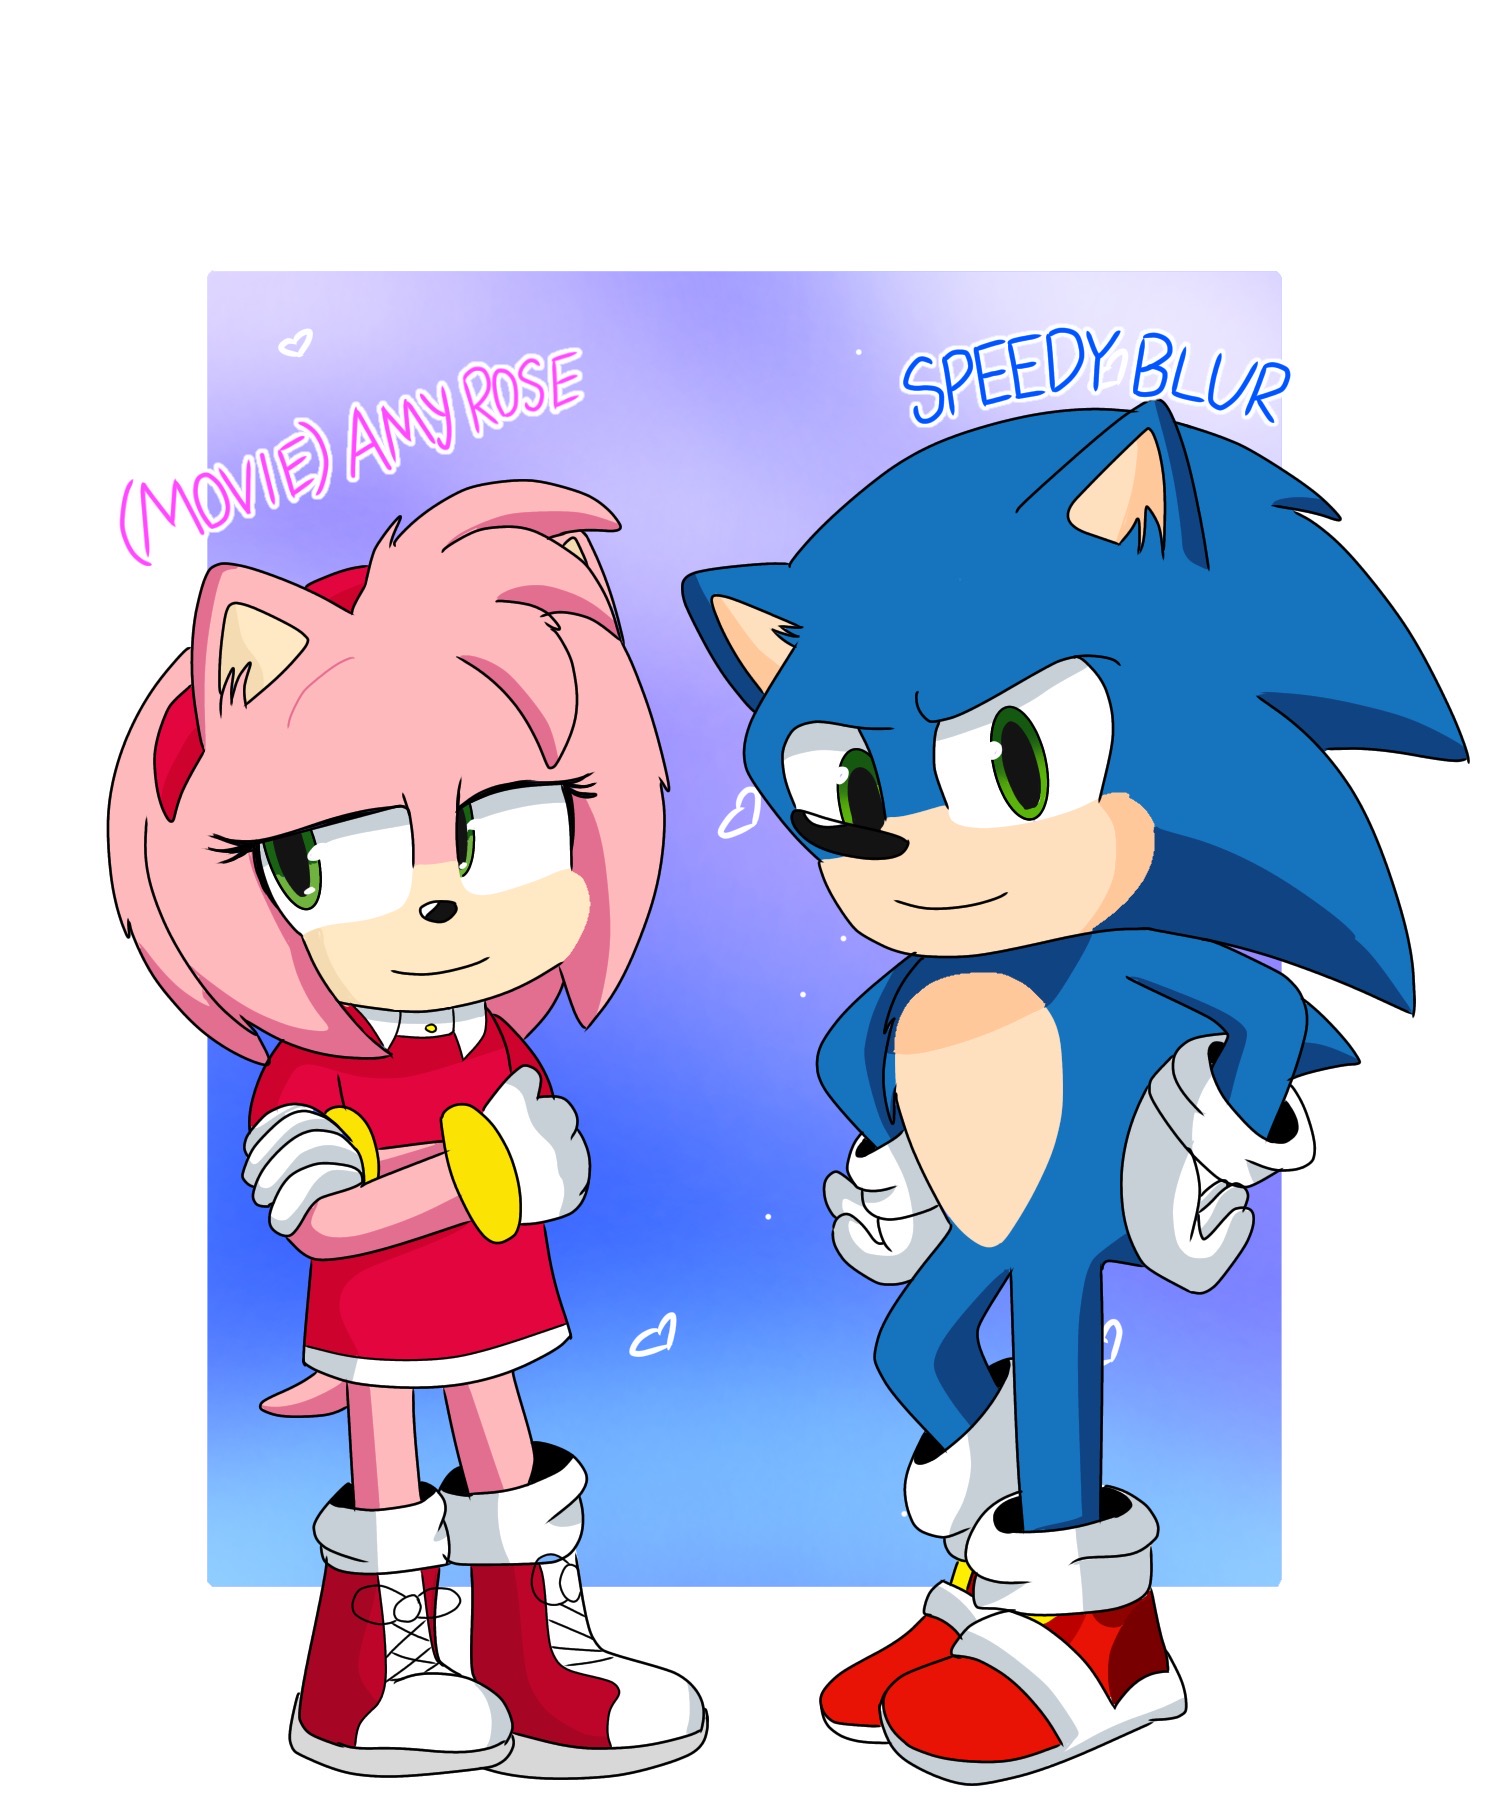 IF* Amy's in Sonic Movie, Sonic the Hedgehog (2020 Film)